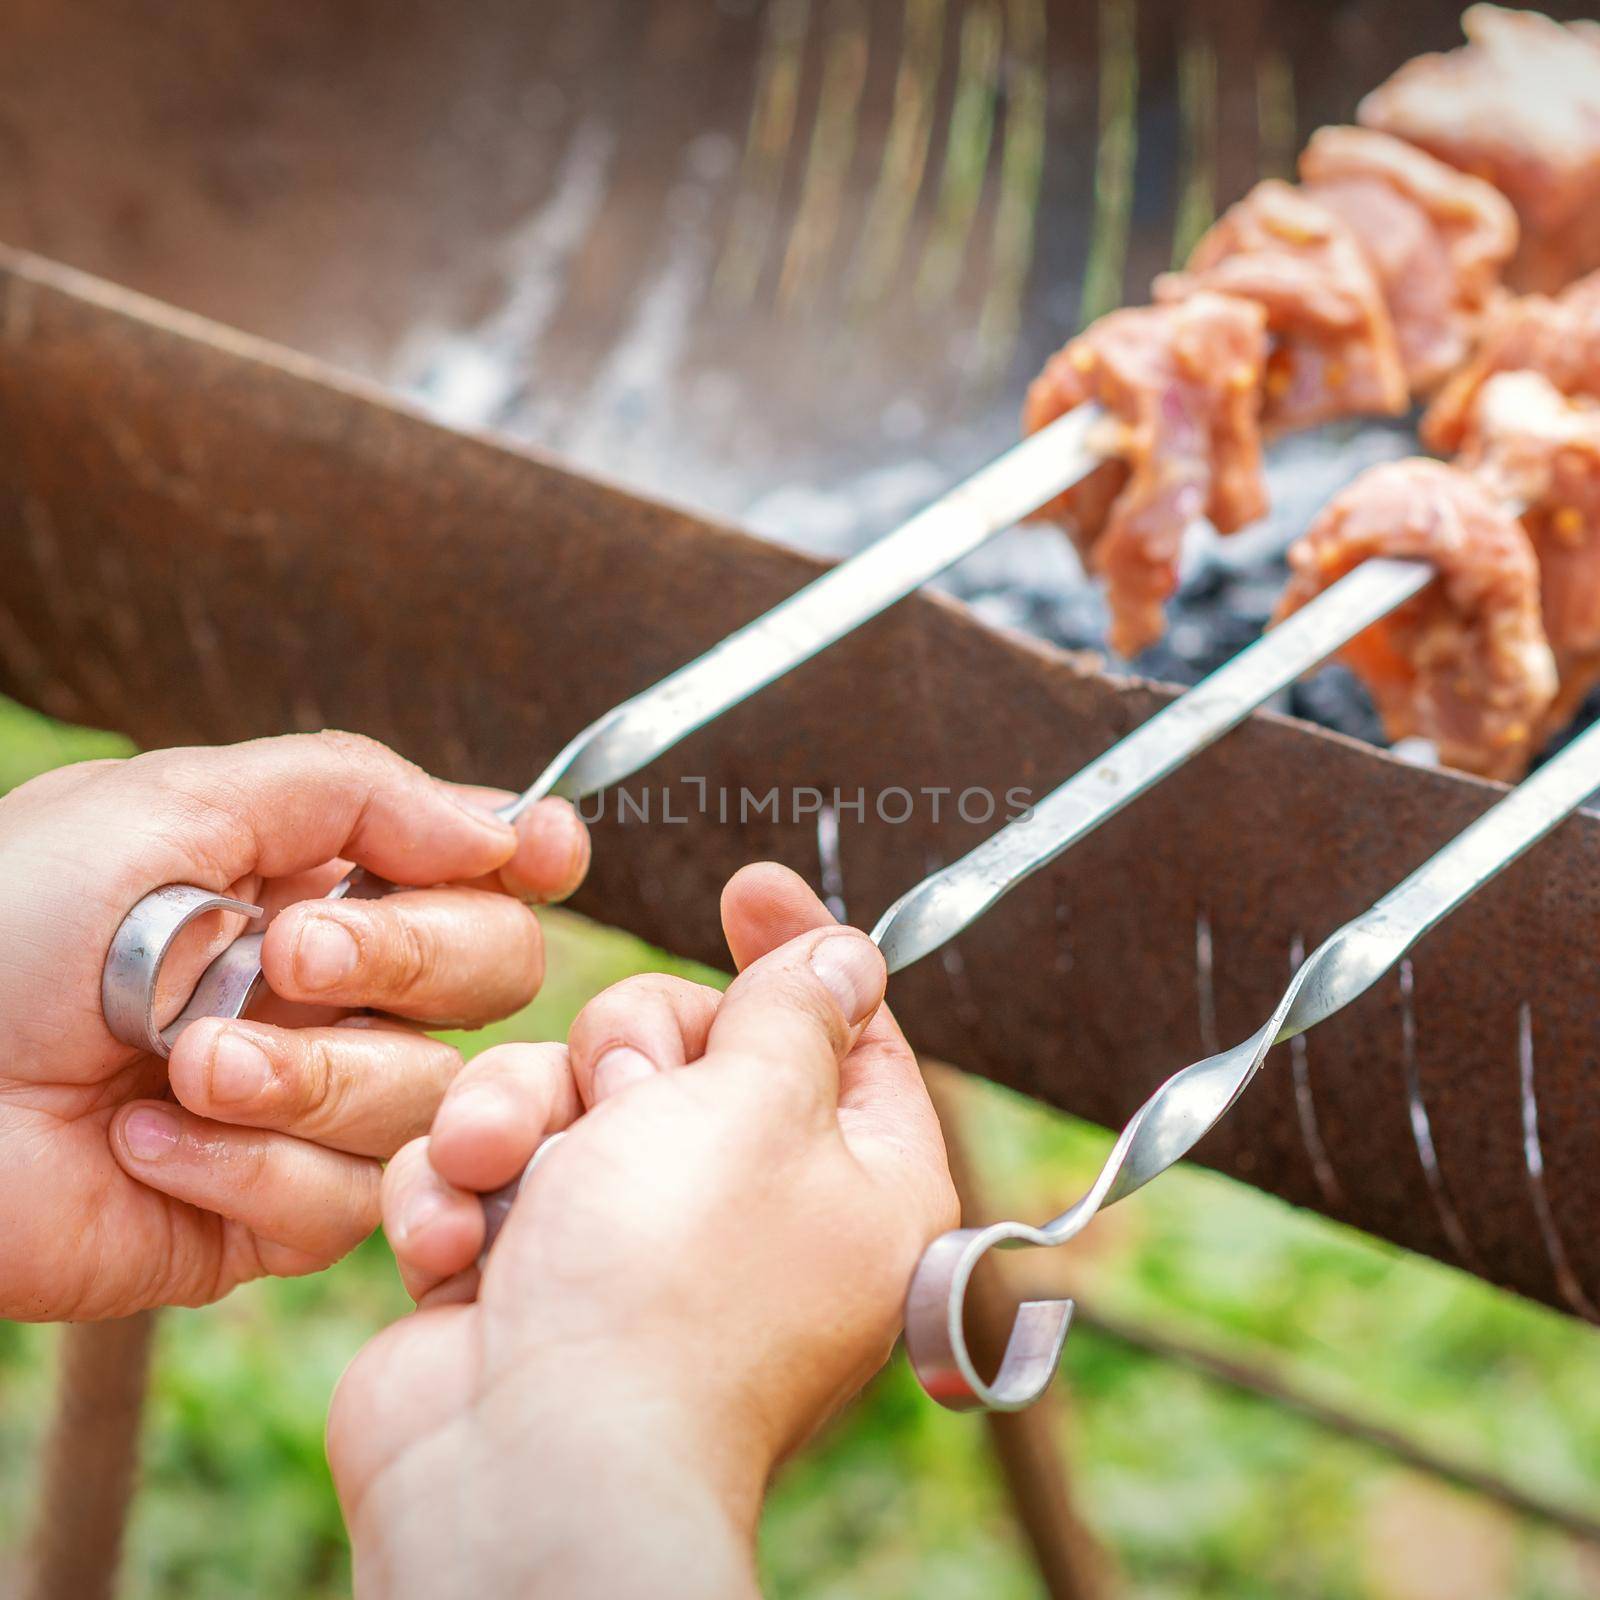 Hands of man prepares barbecue meat on skewer by grill on fire outdoors